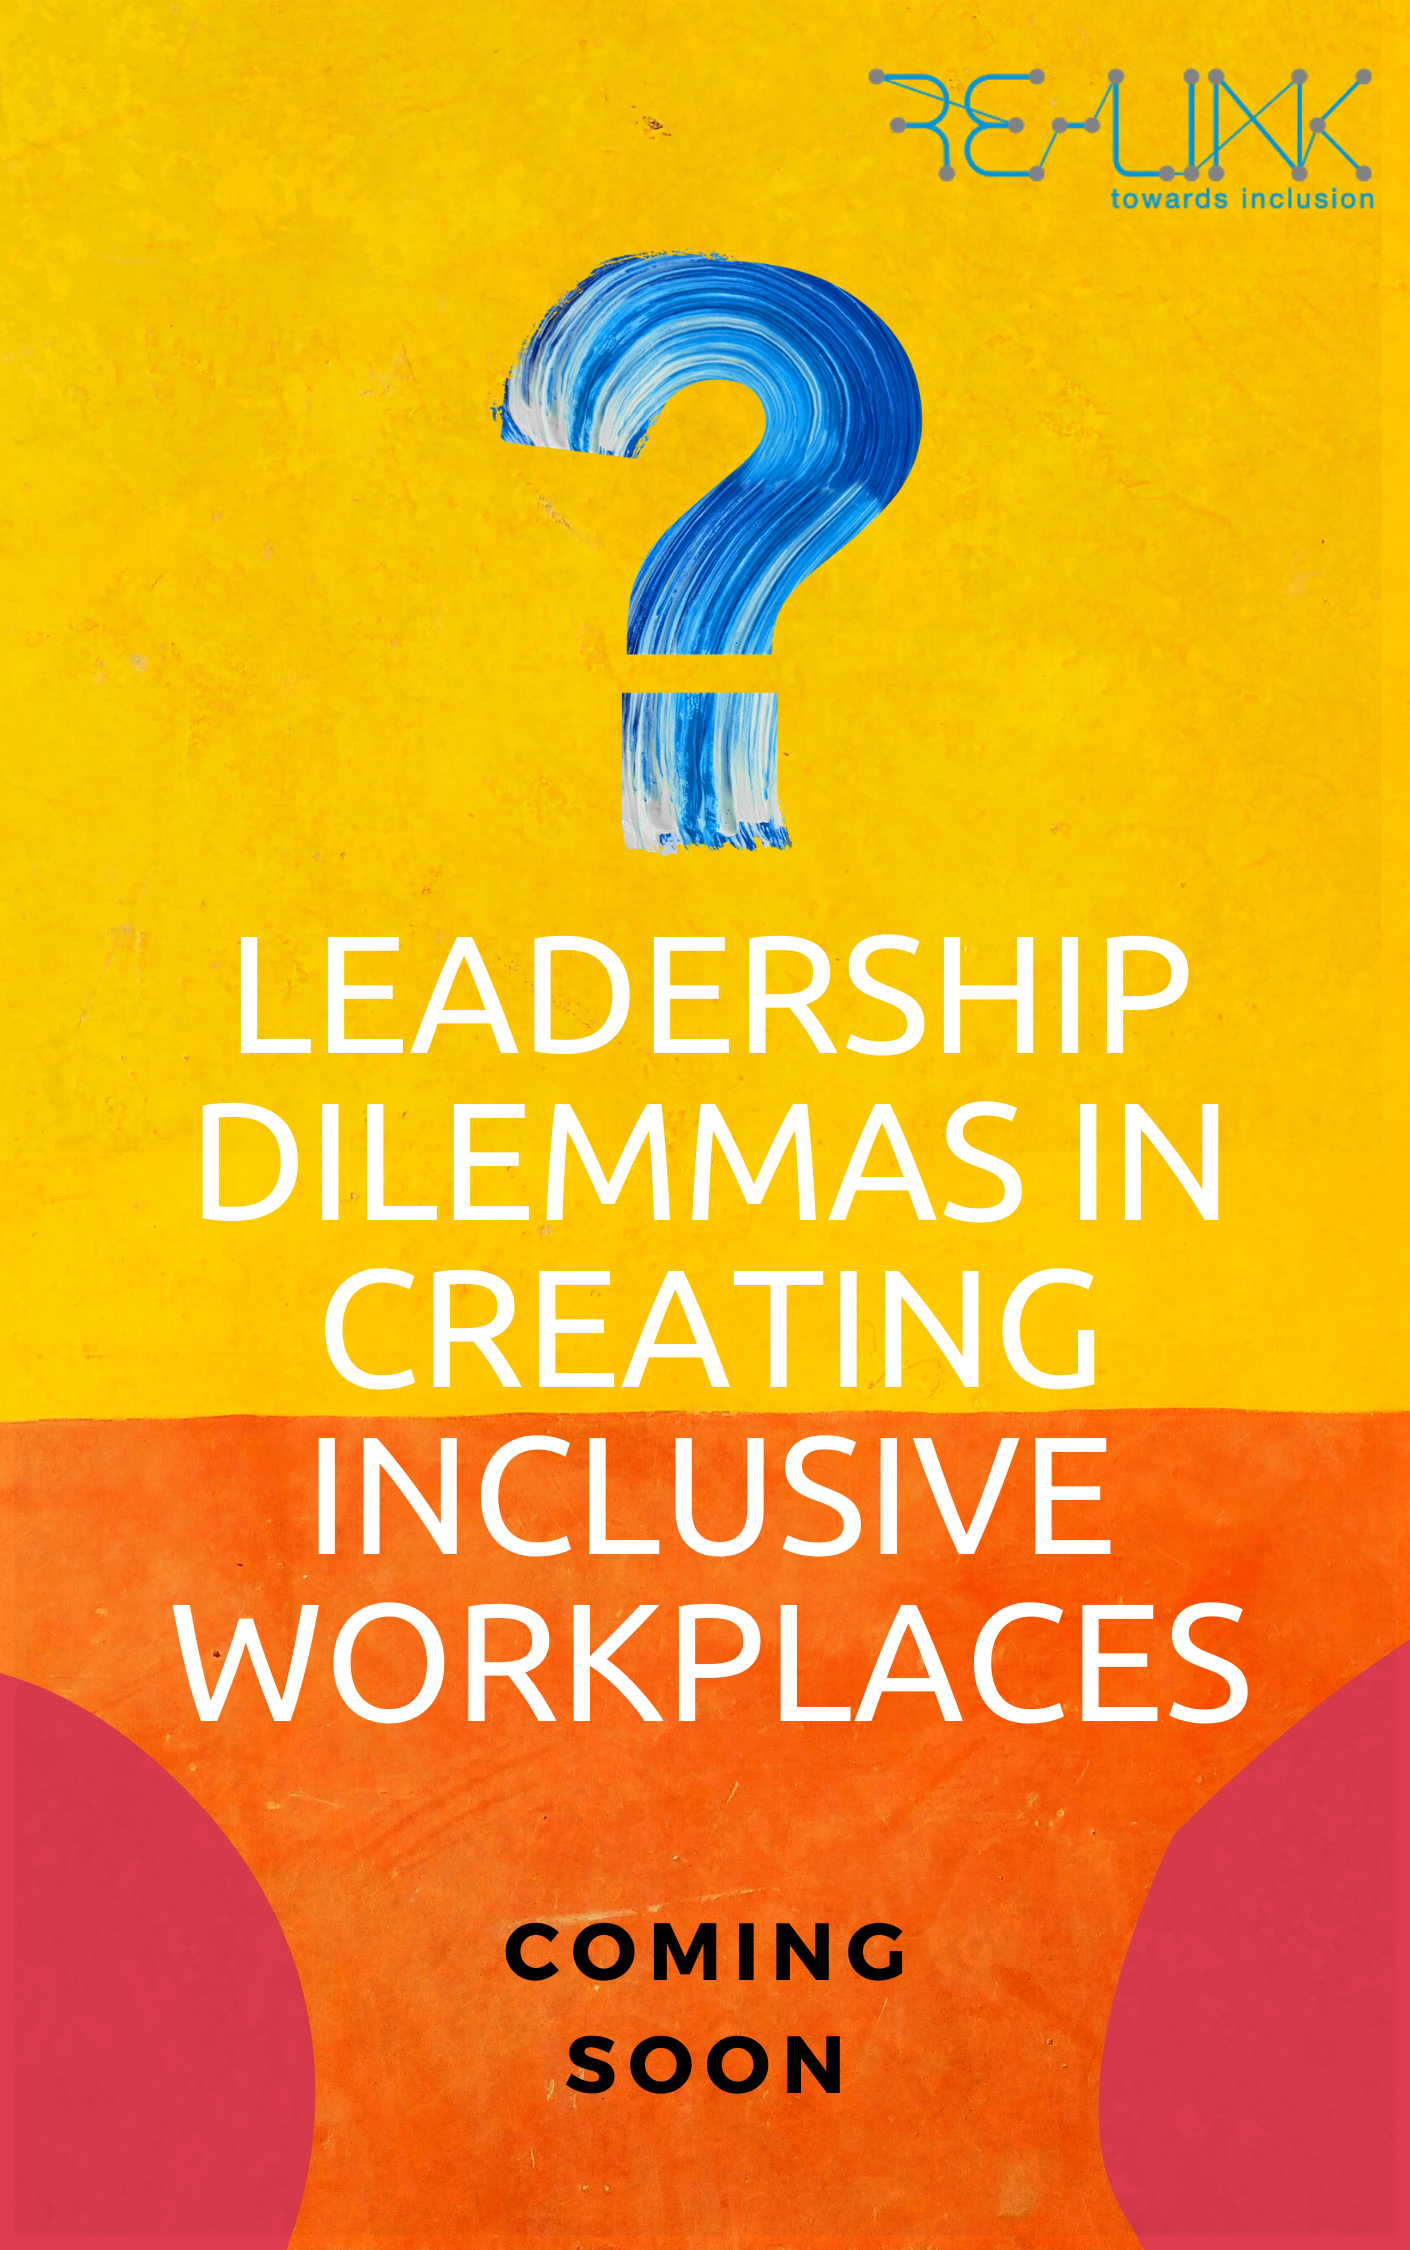 Leadership dilemmas in creating inclusive workplace